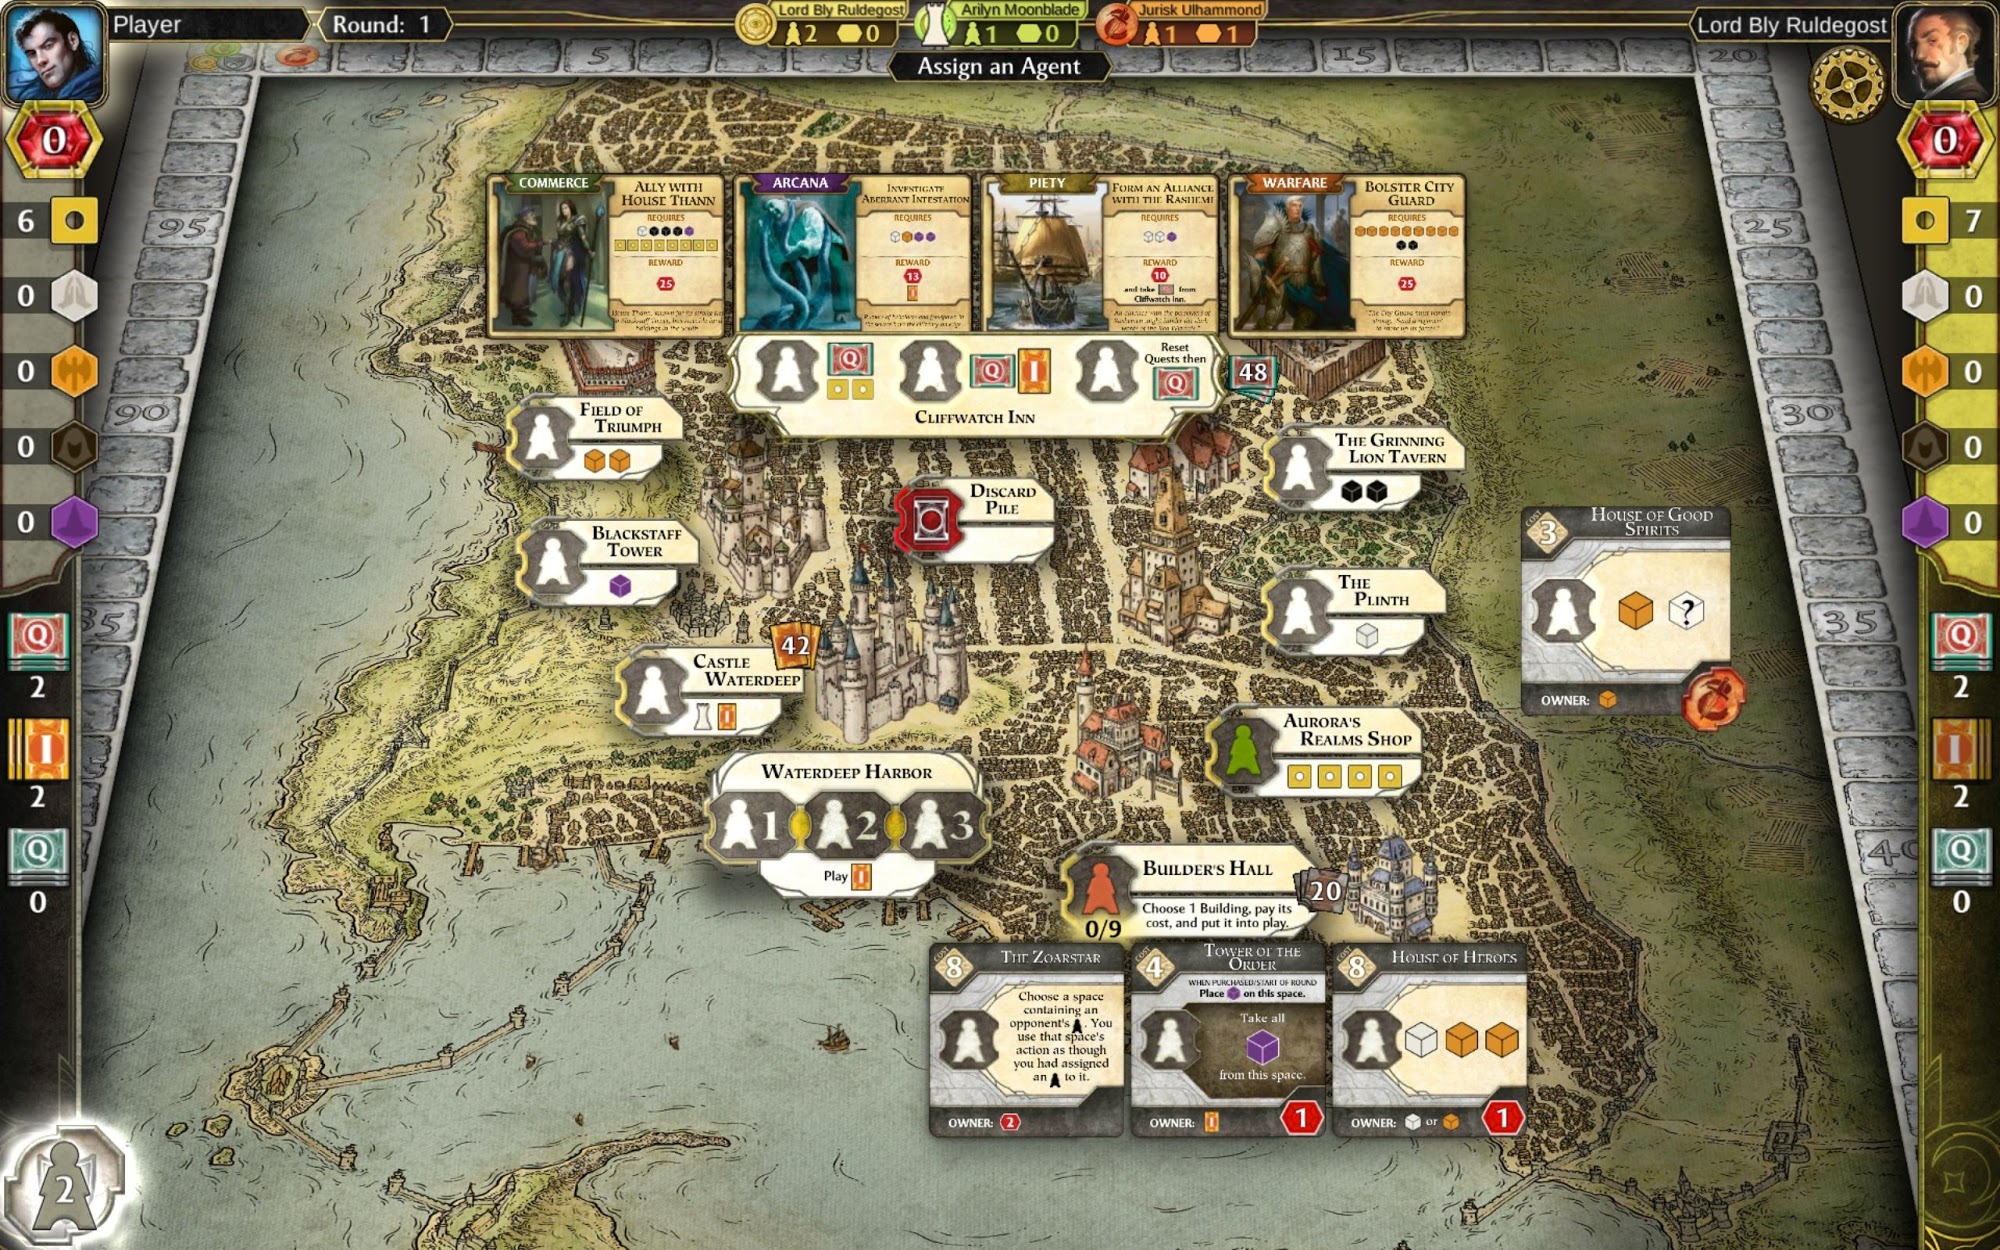 D&D Lords of Waterdeep for Android